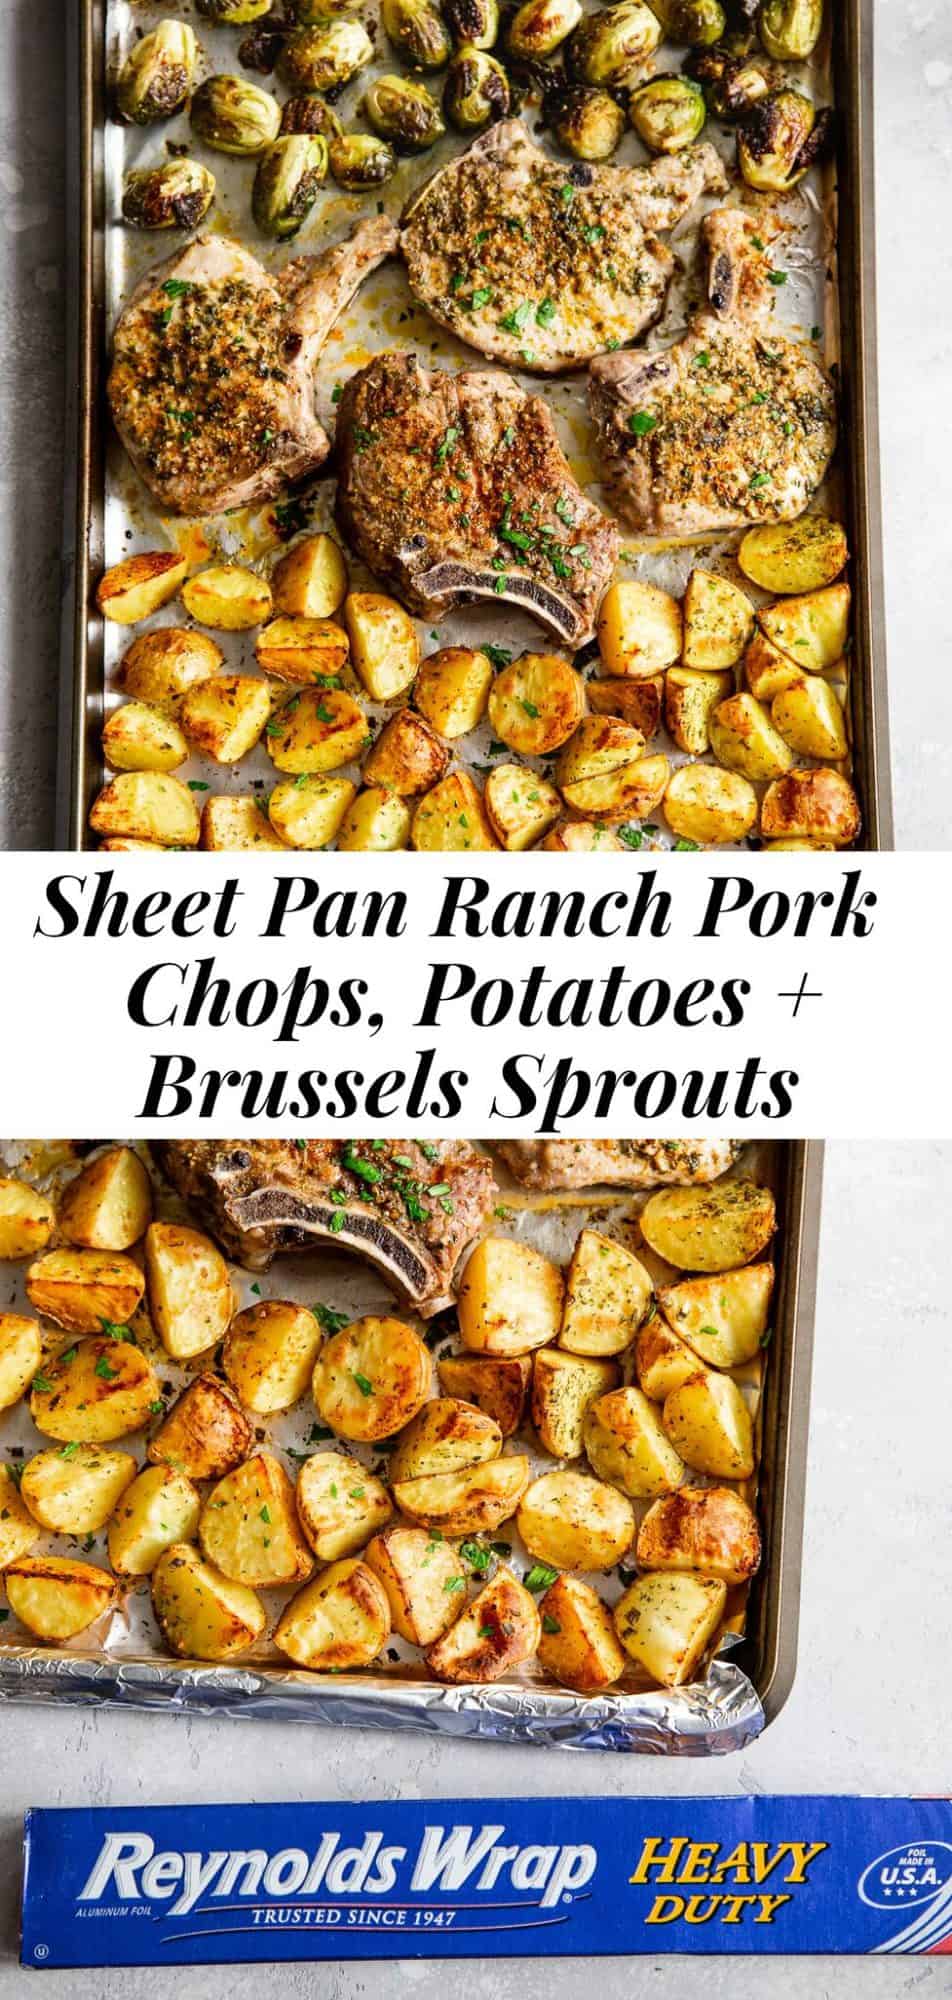 Sheet Pan Ranch Pork Chops with Potatoes and Brussels Sprouts